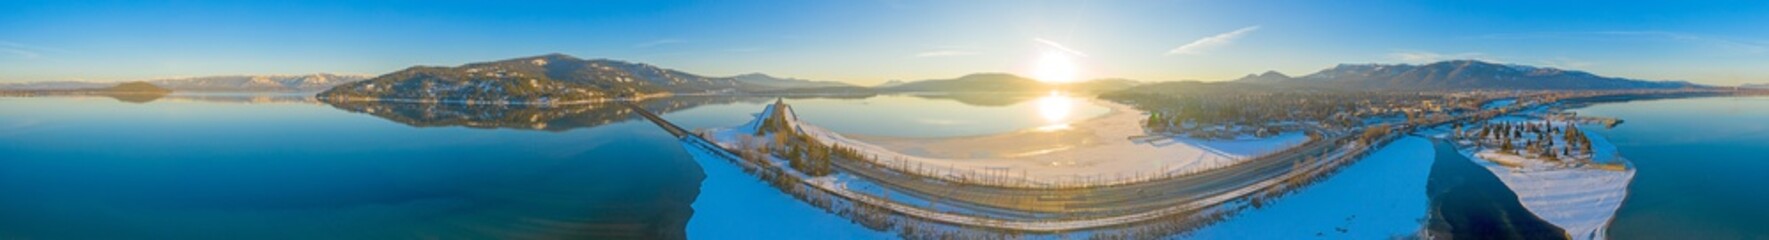 Sandpoint Idaho 360 View Waterfront at Sunset Winter Snowy Sun Panoramic Landscape